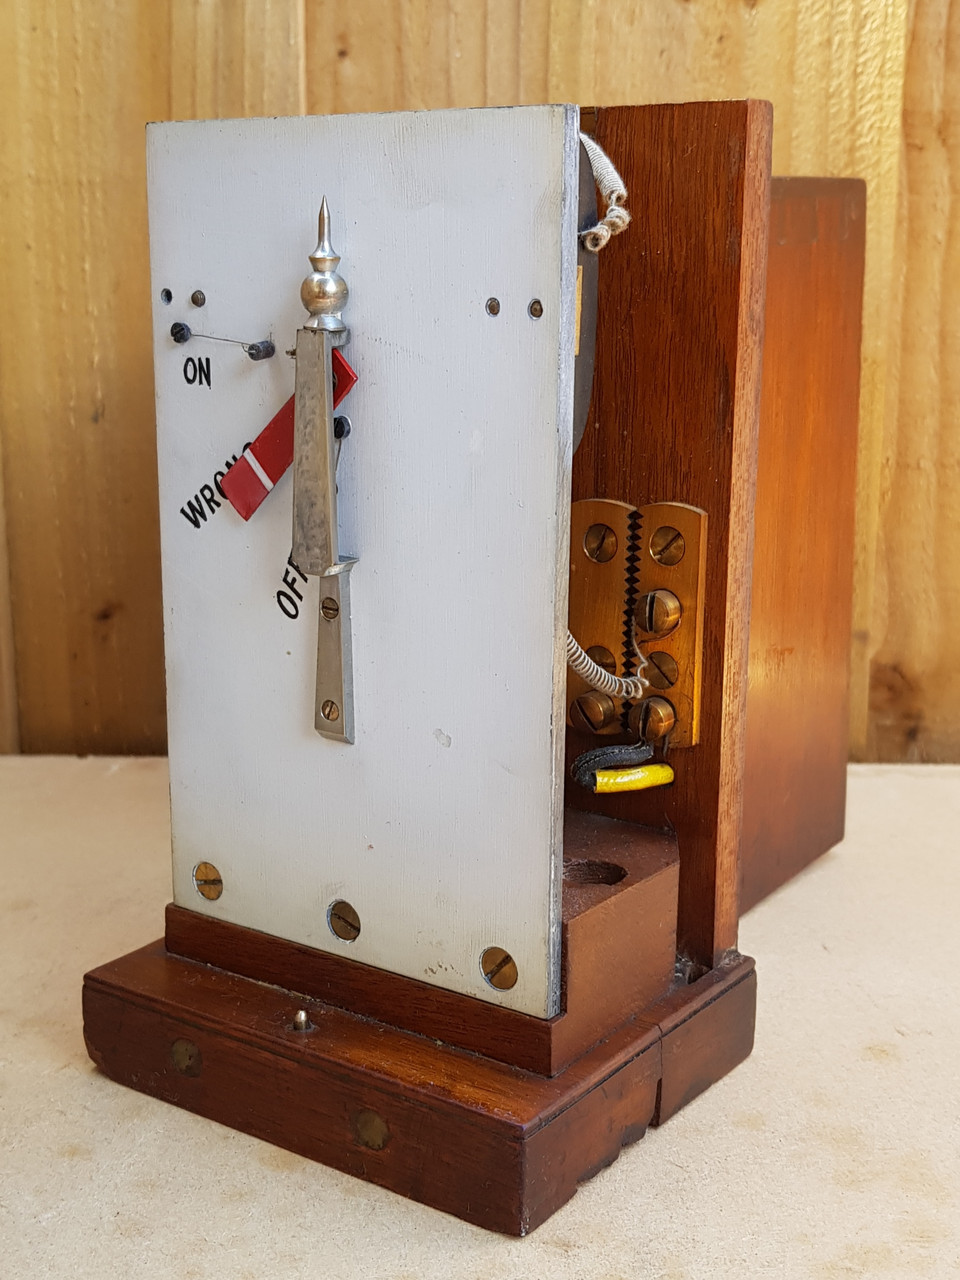 VT 5350. GREAT WESTERN RAILWAY WOOD CASED SIGNAL ARM REPEATER.